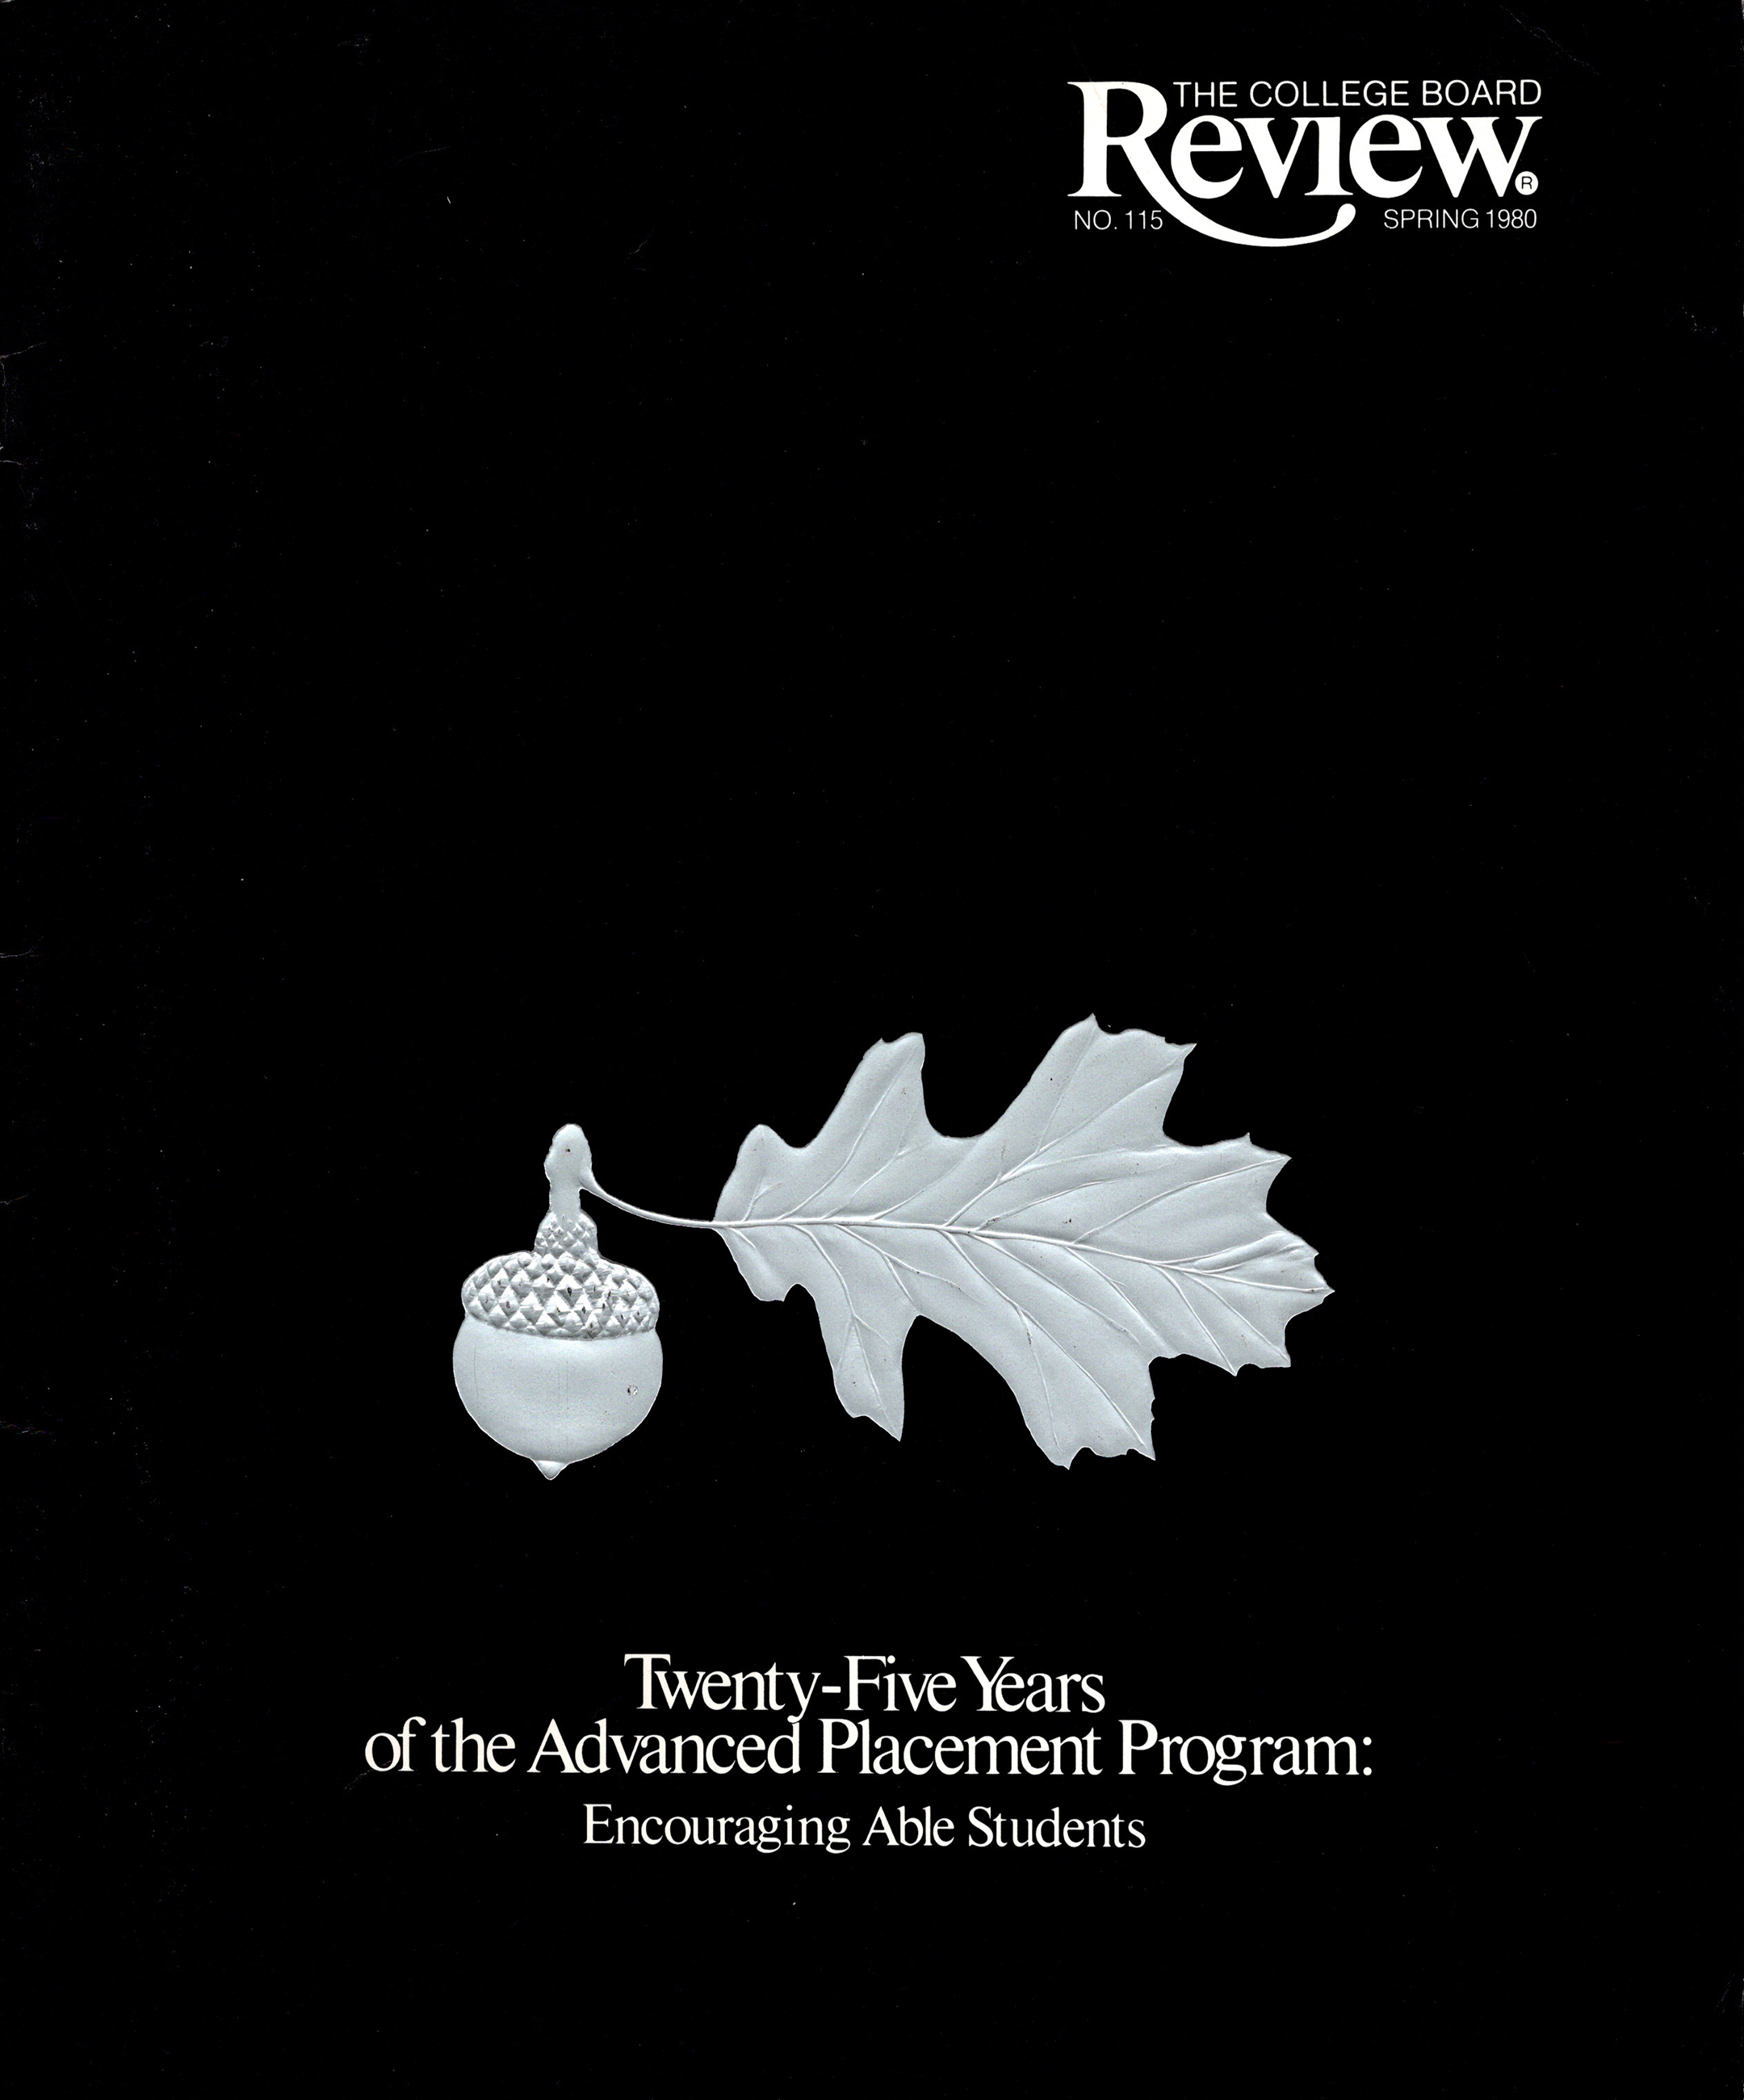 cover of the spring 1980 issue of the college board review featuring a silver acorn and oak leaf on a black background